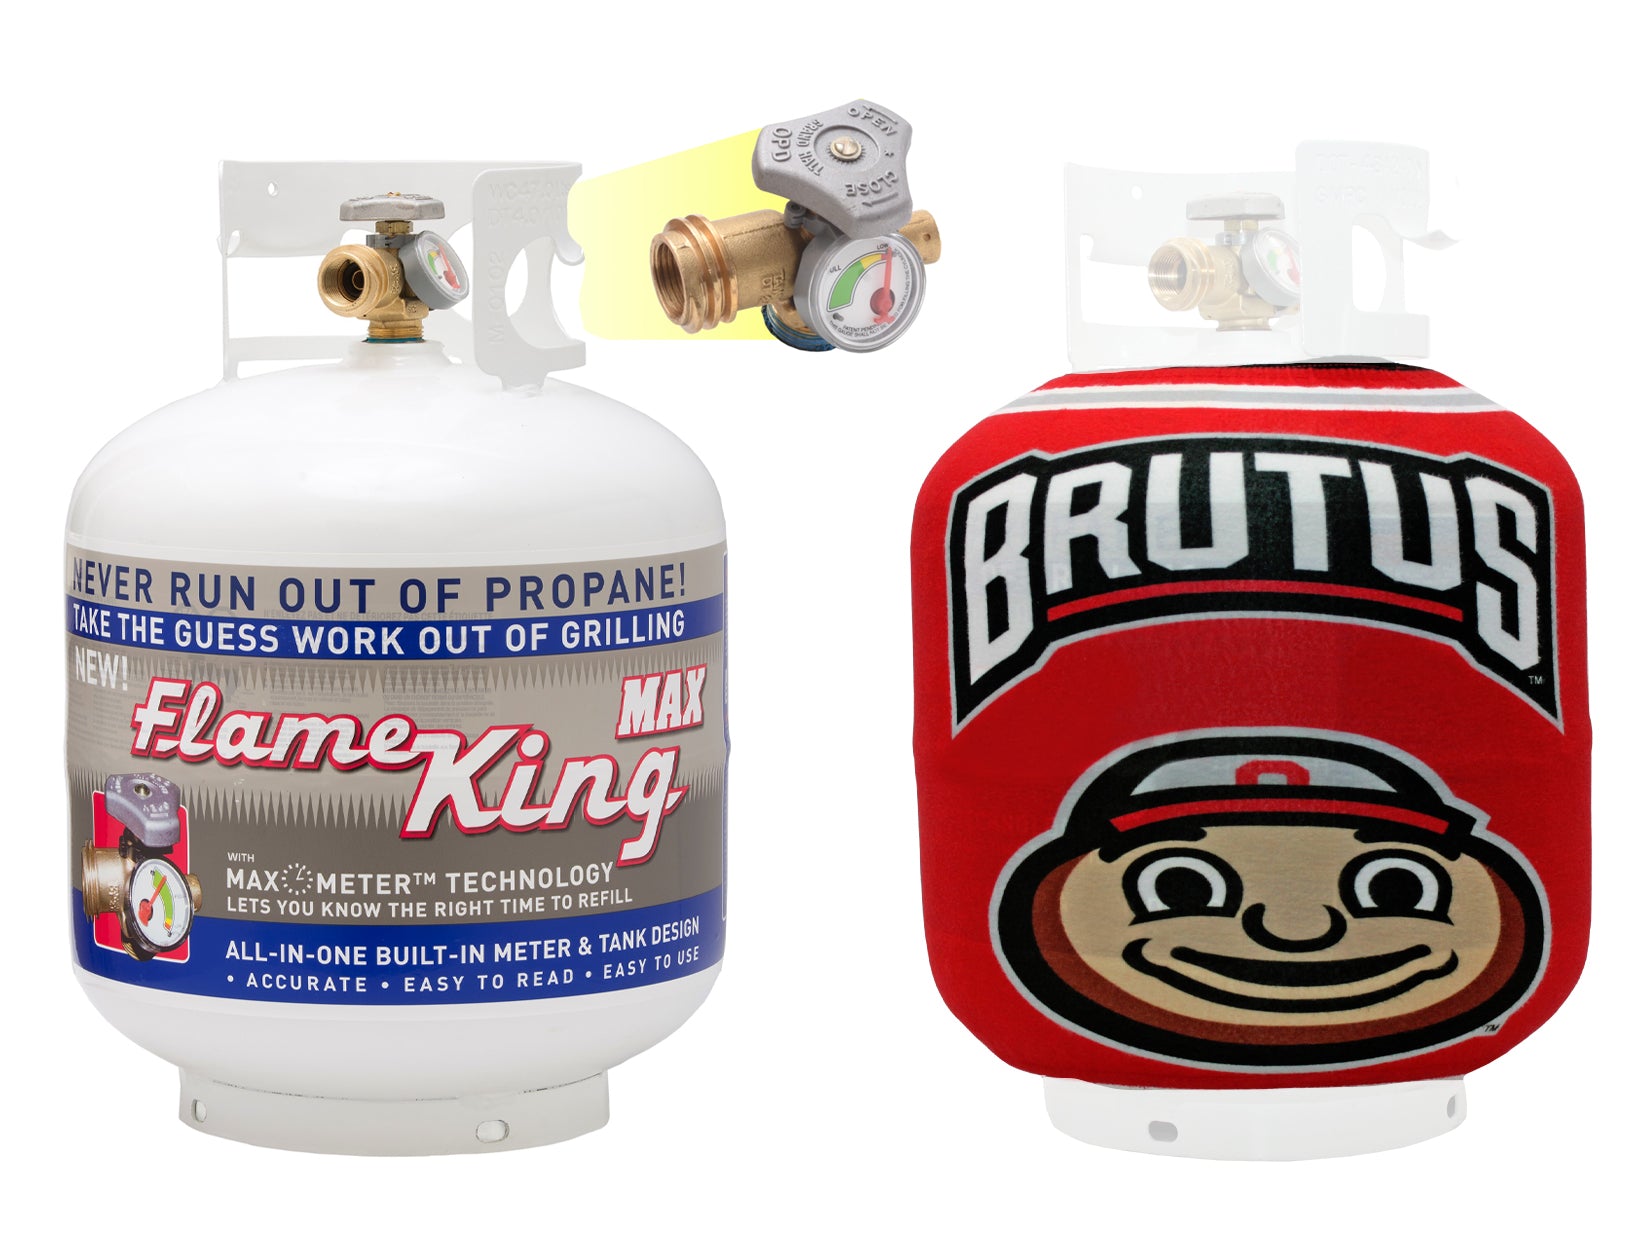 Flame King 20lb Propane Tank LP Cylinder with OPD & Gauge + Ohio State Propane Tank Sleeve Cover